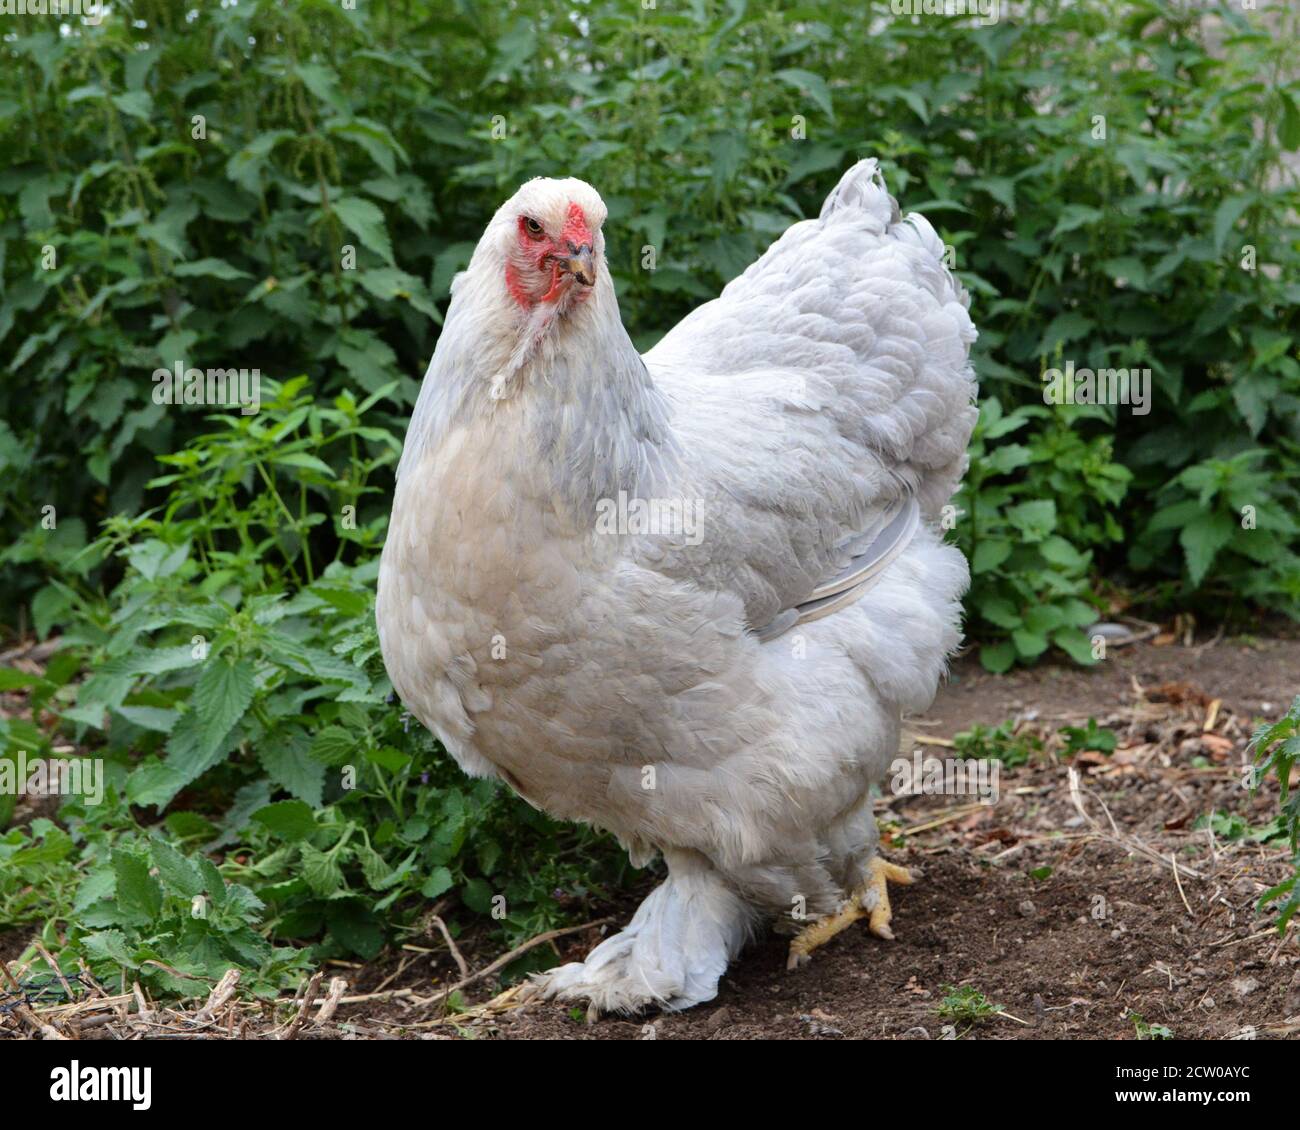 https://c8.alamy.com/comp/2CW0AYC/beautiful-brahma-chicken-in-a-hen-house-or-chicken-coop-2CW0AYC.jpg